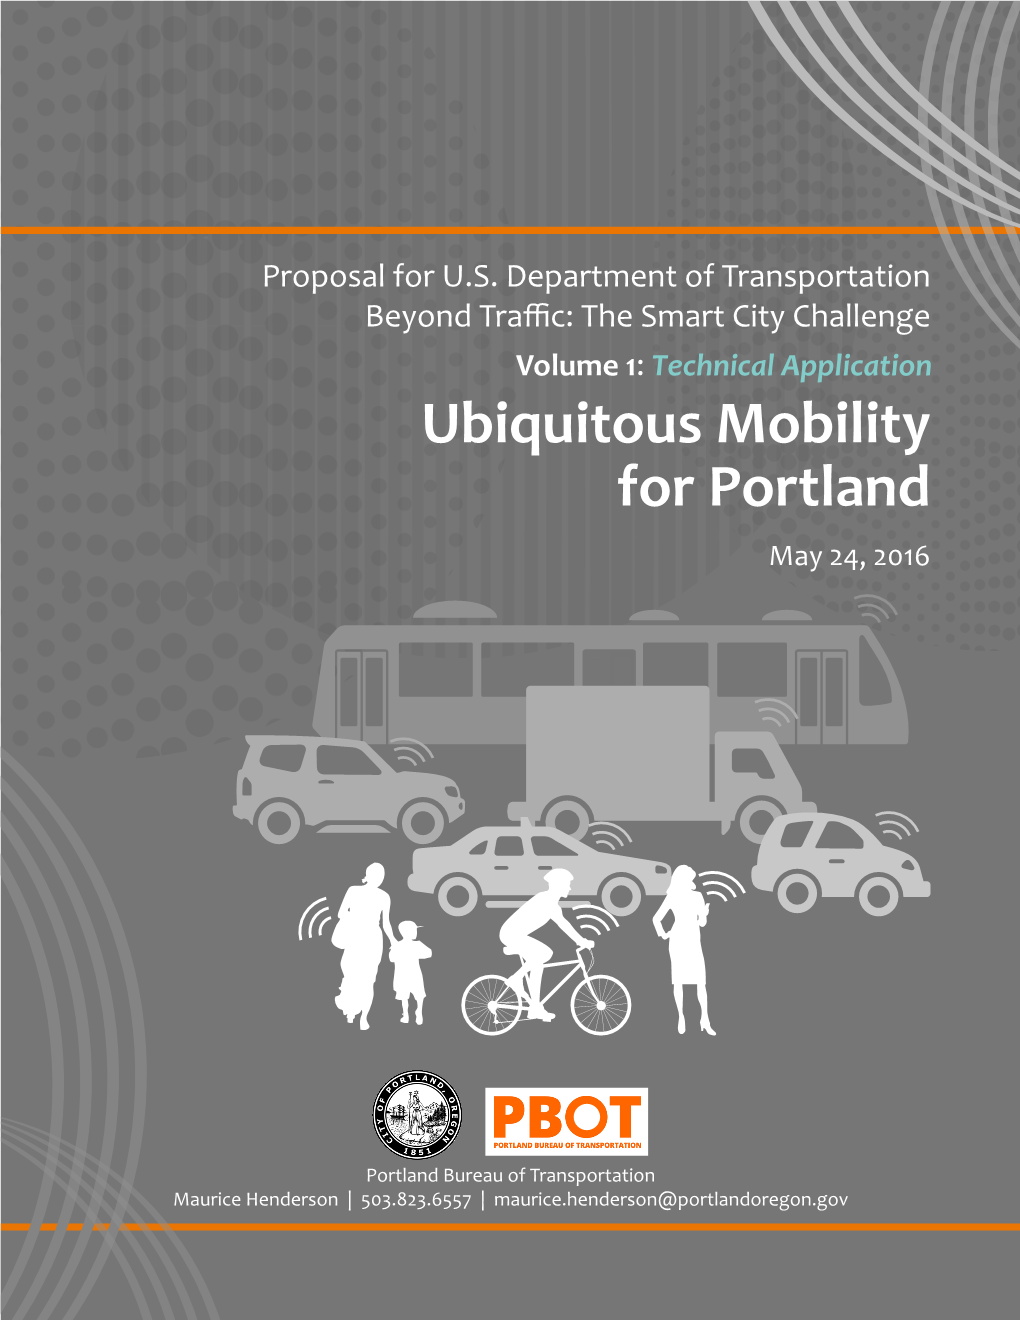 Ubiquitous Mobility for Portland May 24, 2016